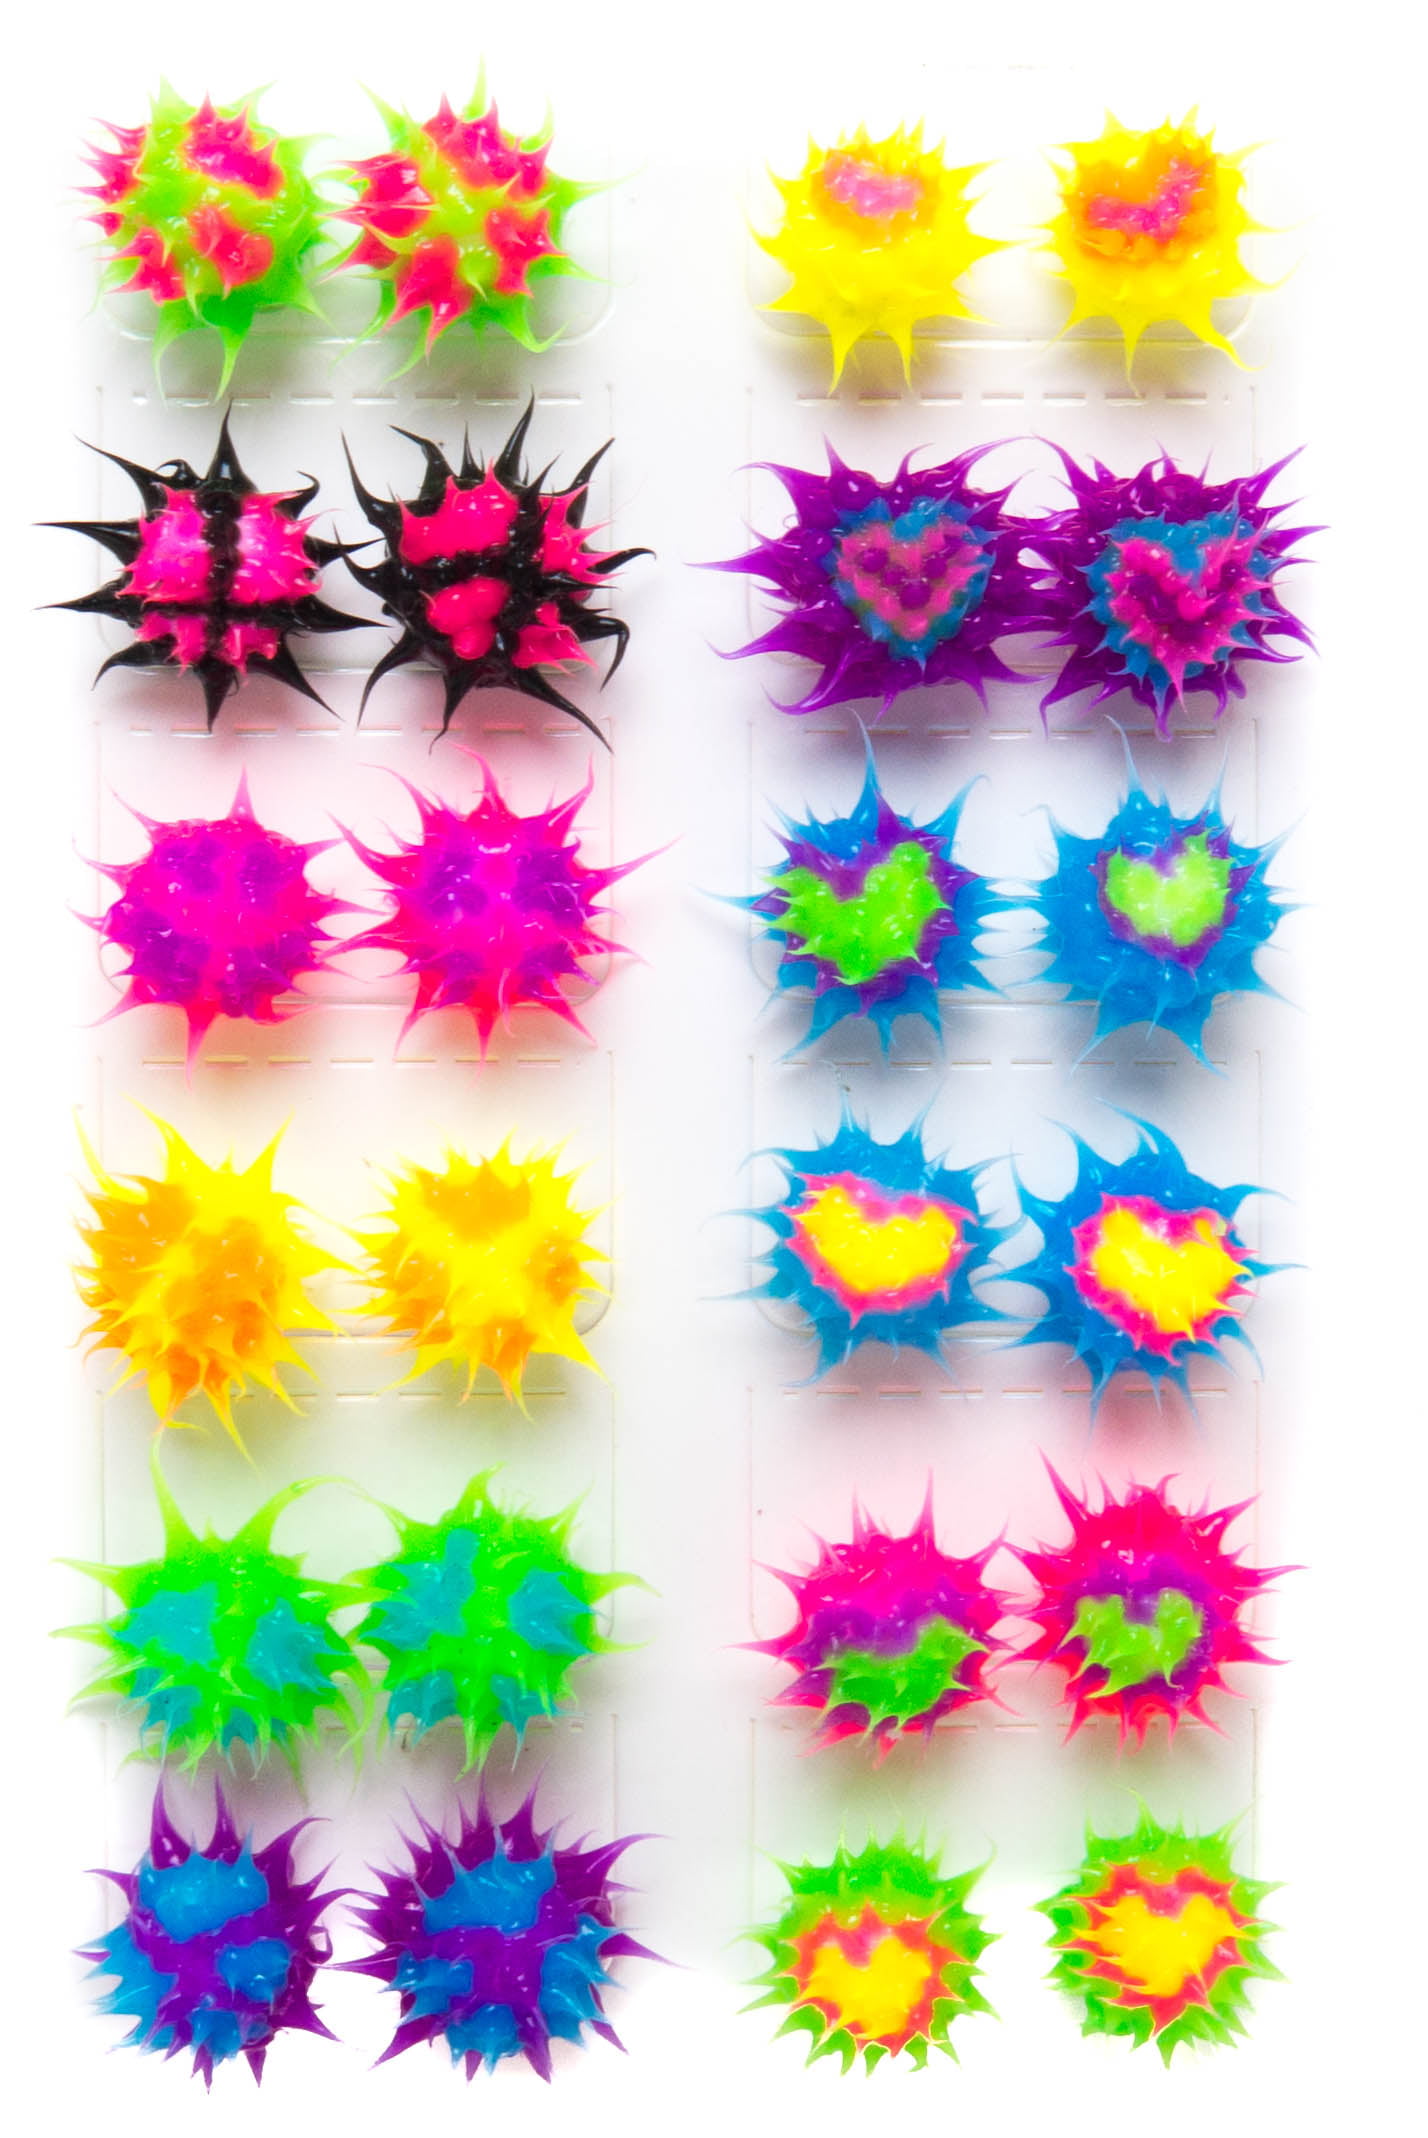 SET OF 12 Heart/Peace Multicolored Rave Ball Earrings| Soft Hypoallergenic Silicone Spikes for Fidget and Sensory Spiky Silicone Stud Earrings for Women,Teens,Girls,Kids Frogsac